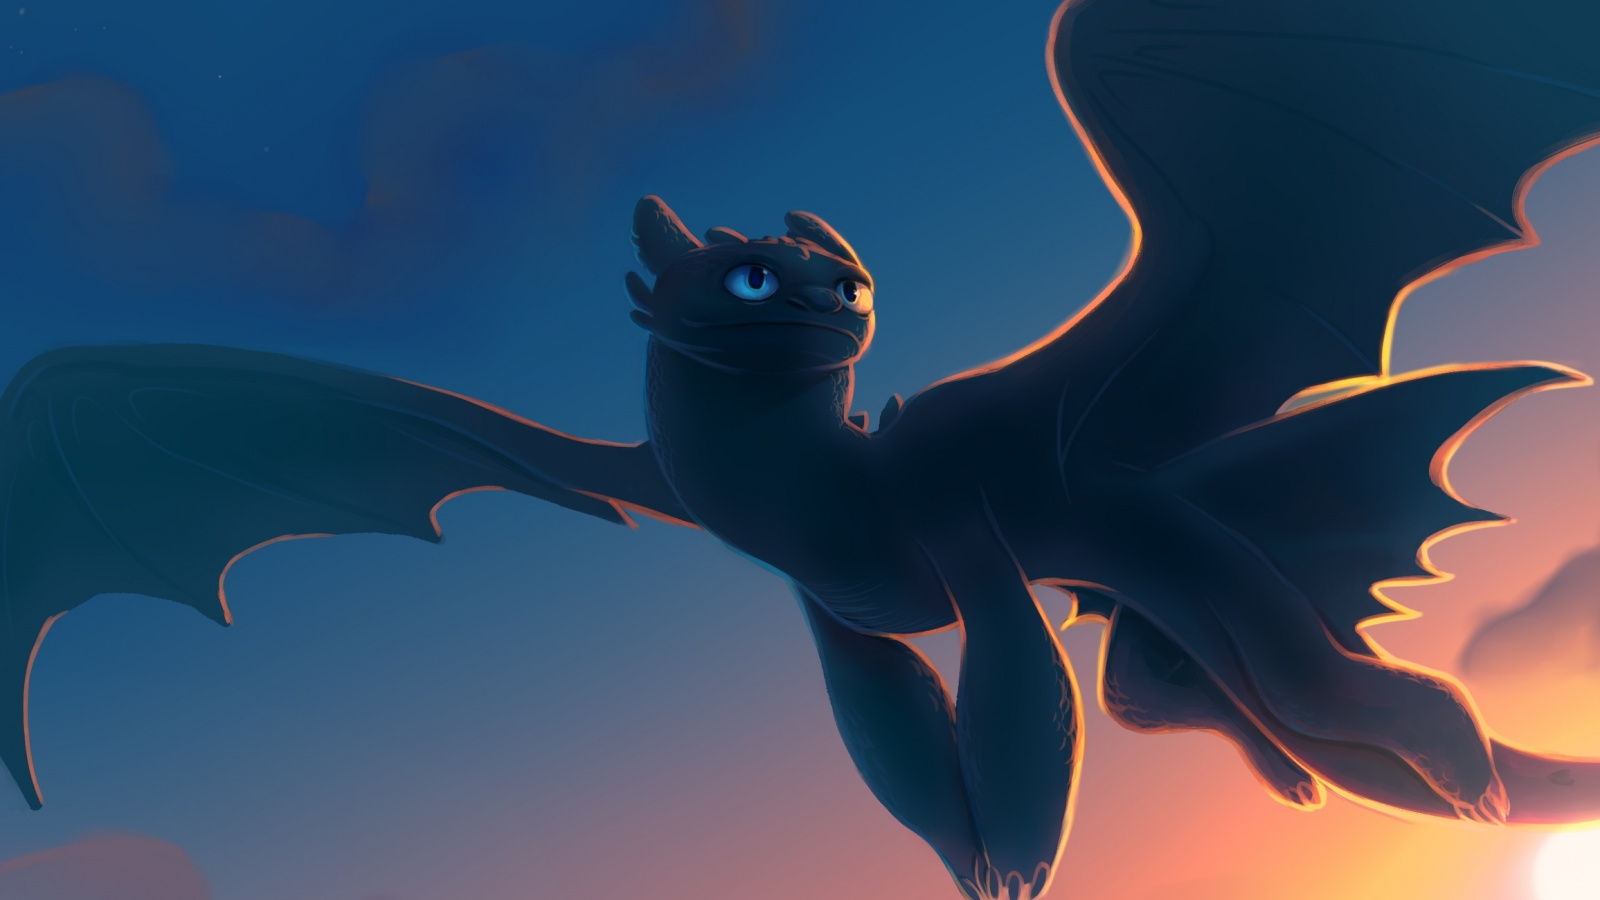 Toothless, Movie, How To Train Your Dragon, 2019, Artwork, - Train Your Dragon Wallpaper Mac - HD Wallpaper 